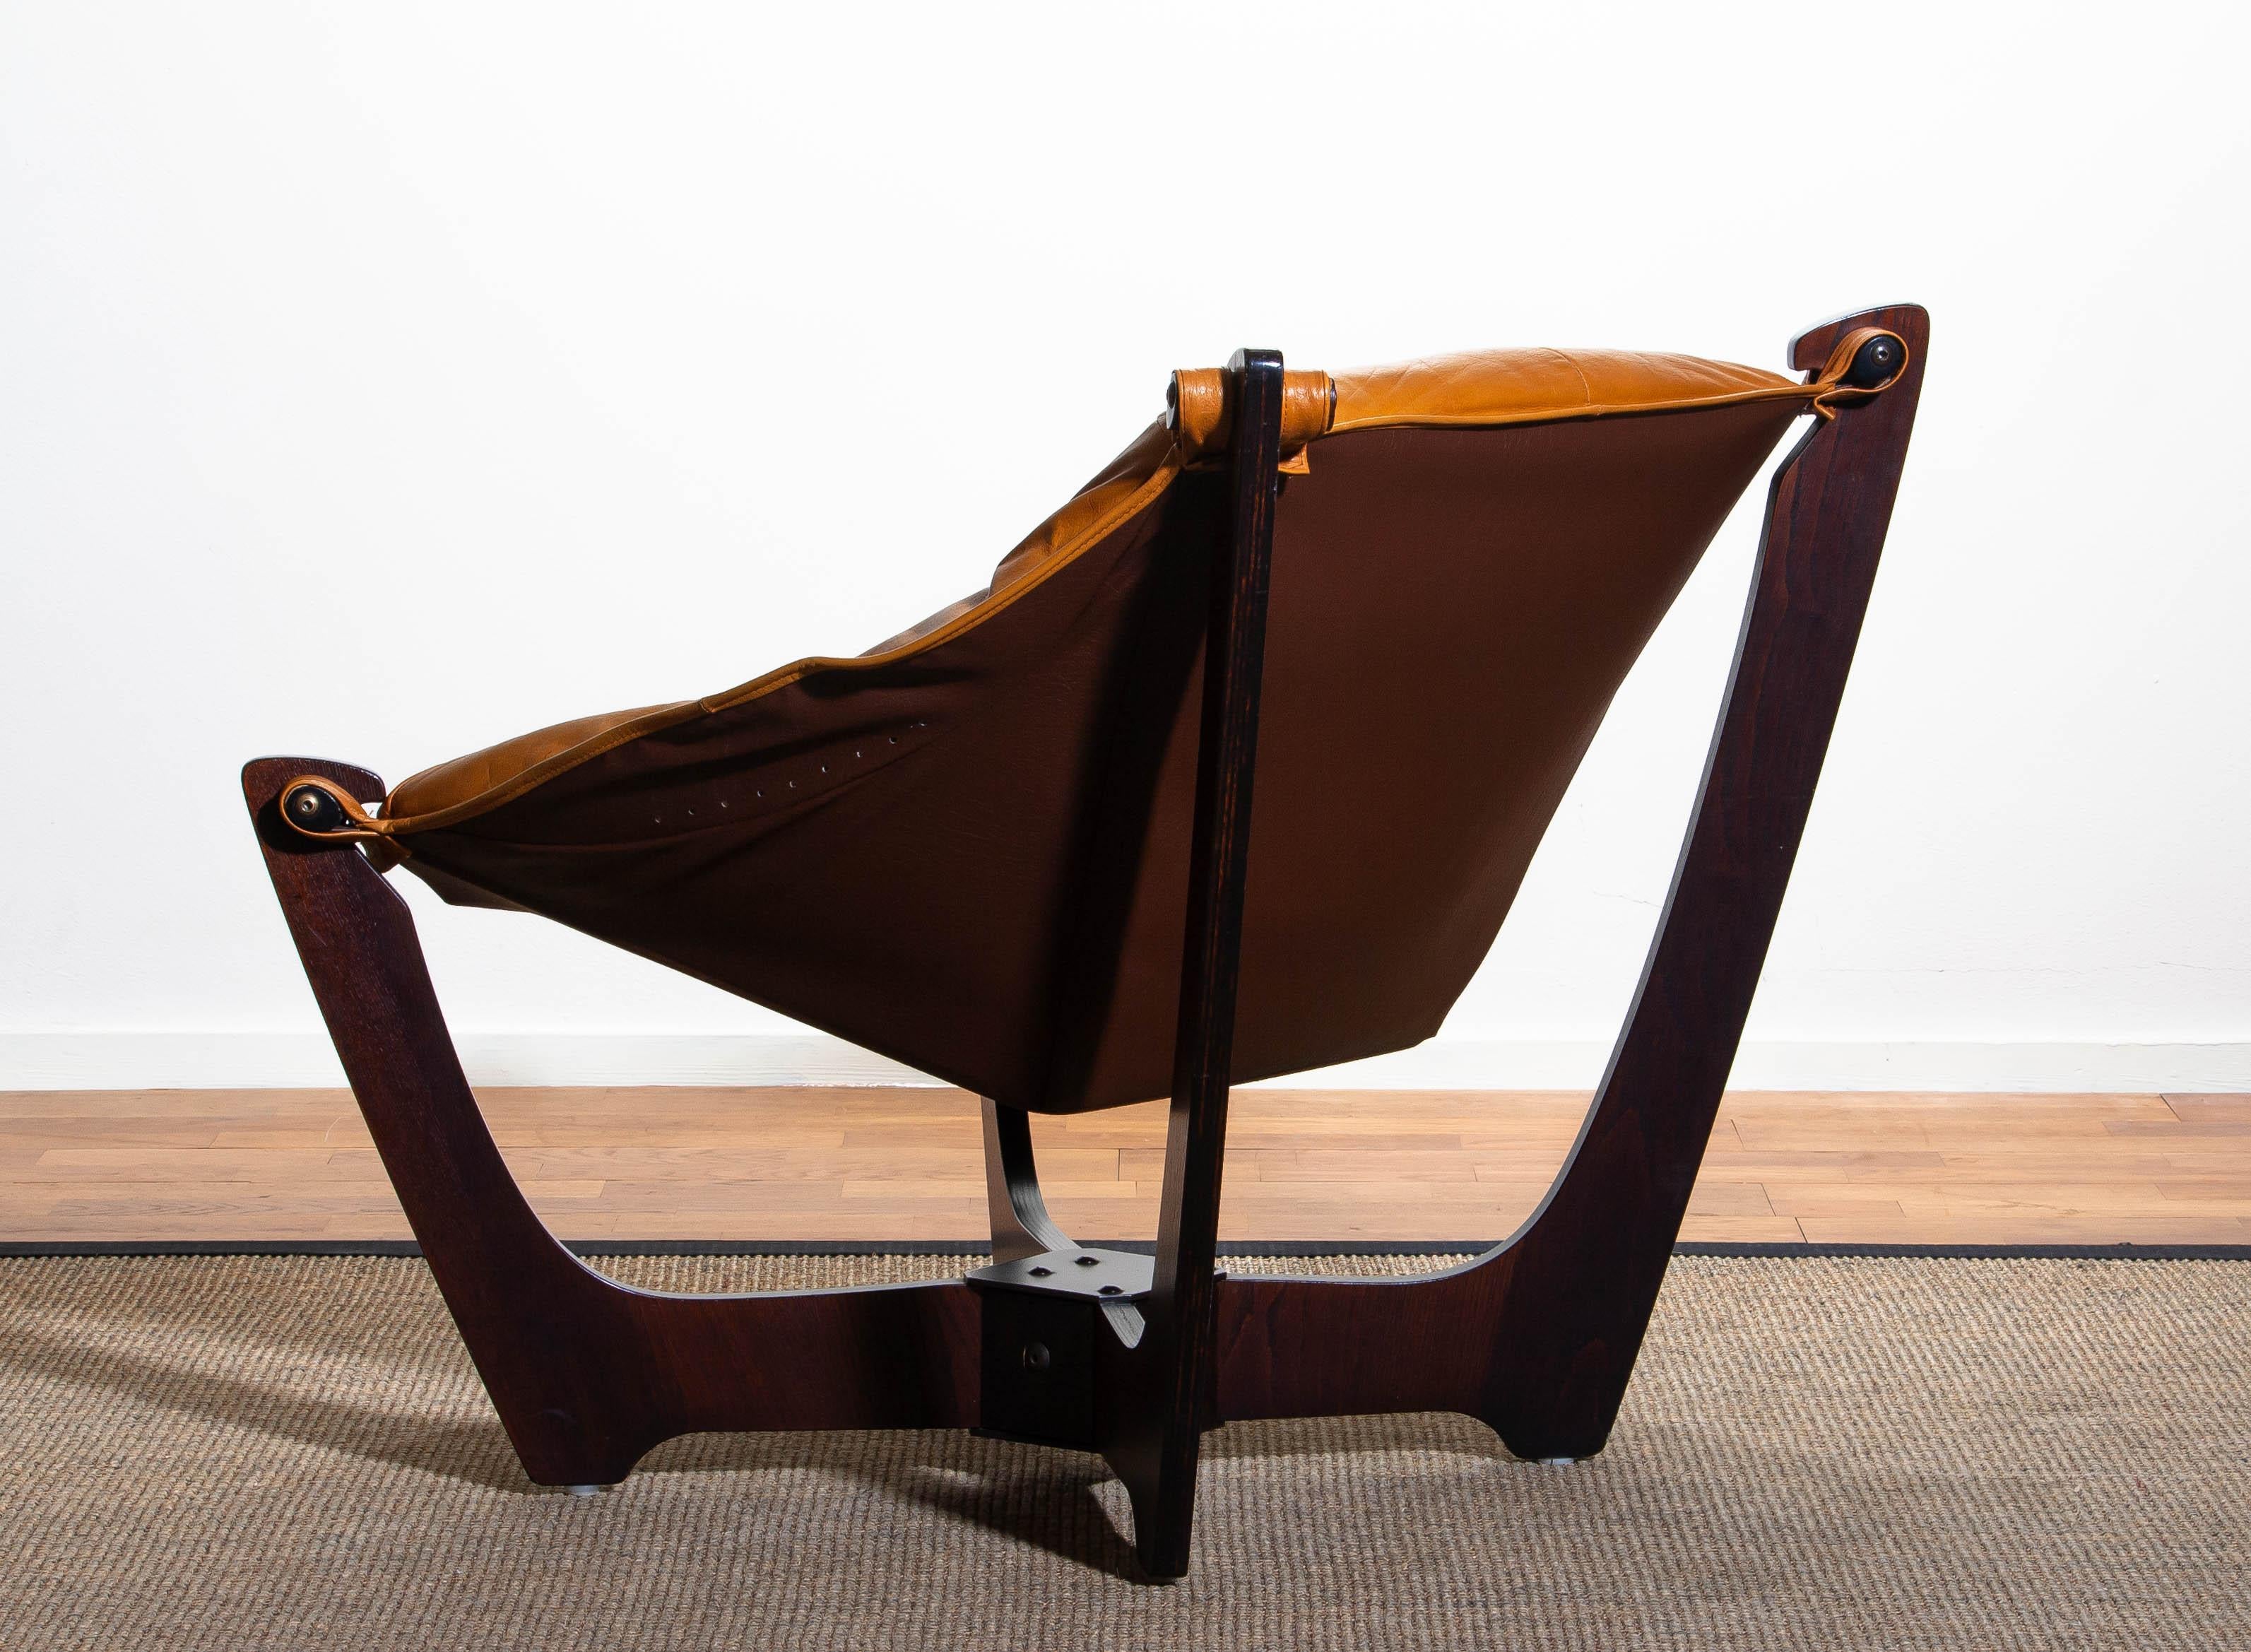 Late 20th Century 1 Camel/Cognac Leather Lounge Chair by Odd Knutsen for Hjellegjerde Møbler, 1970